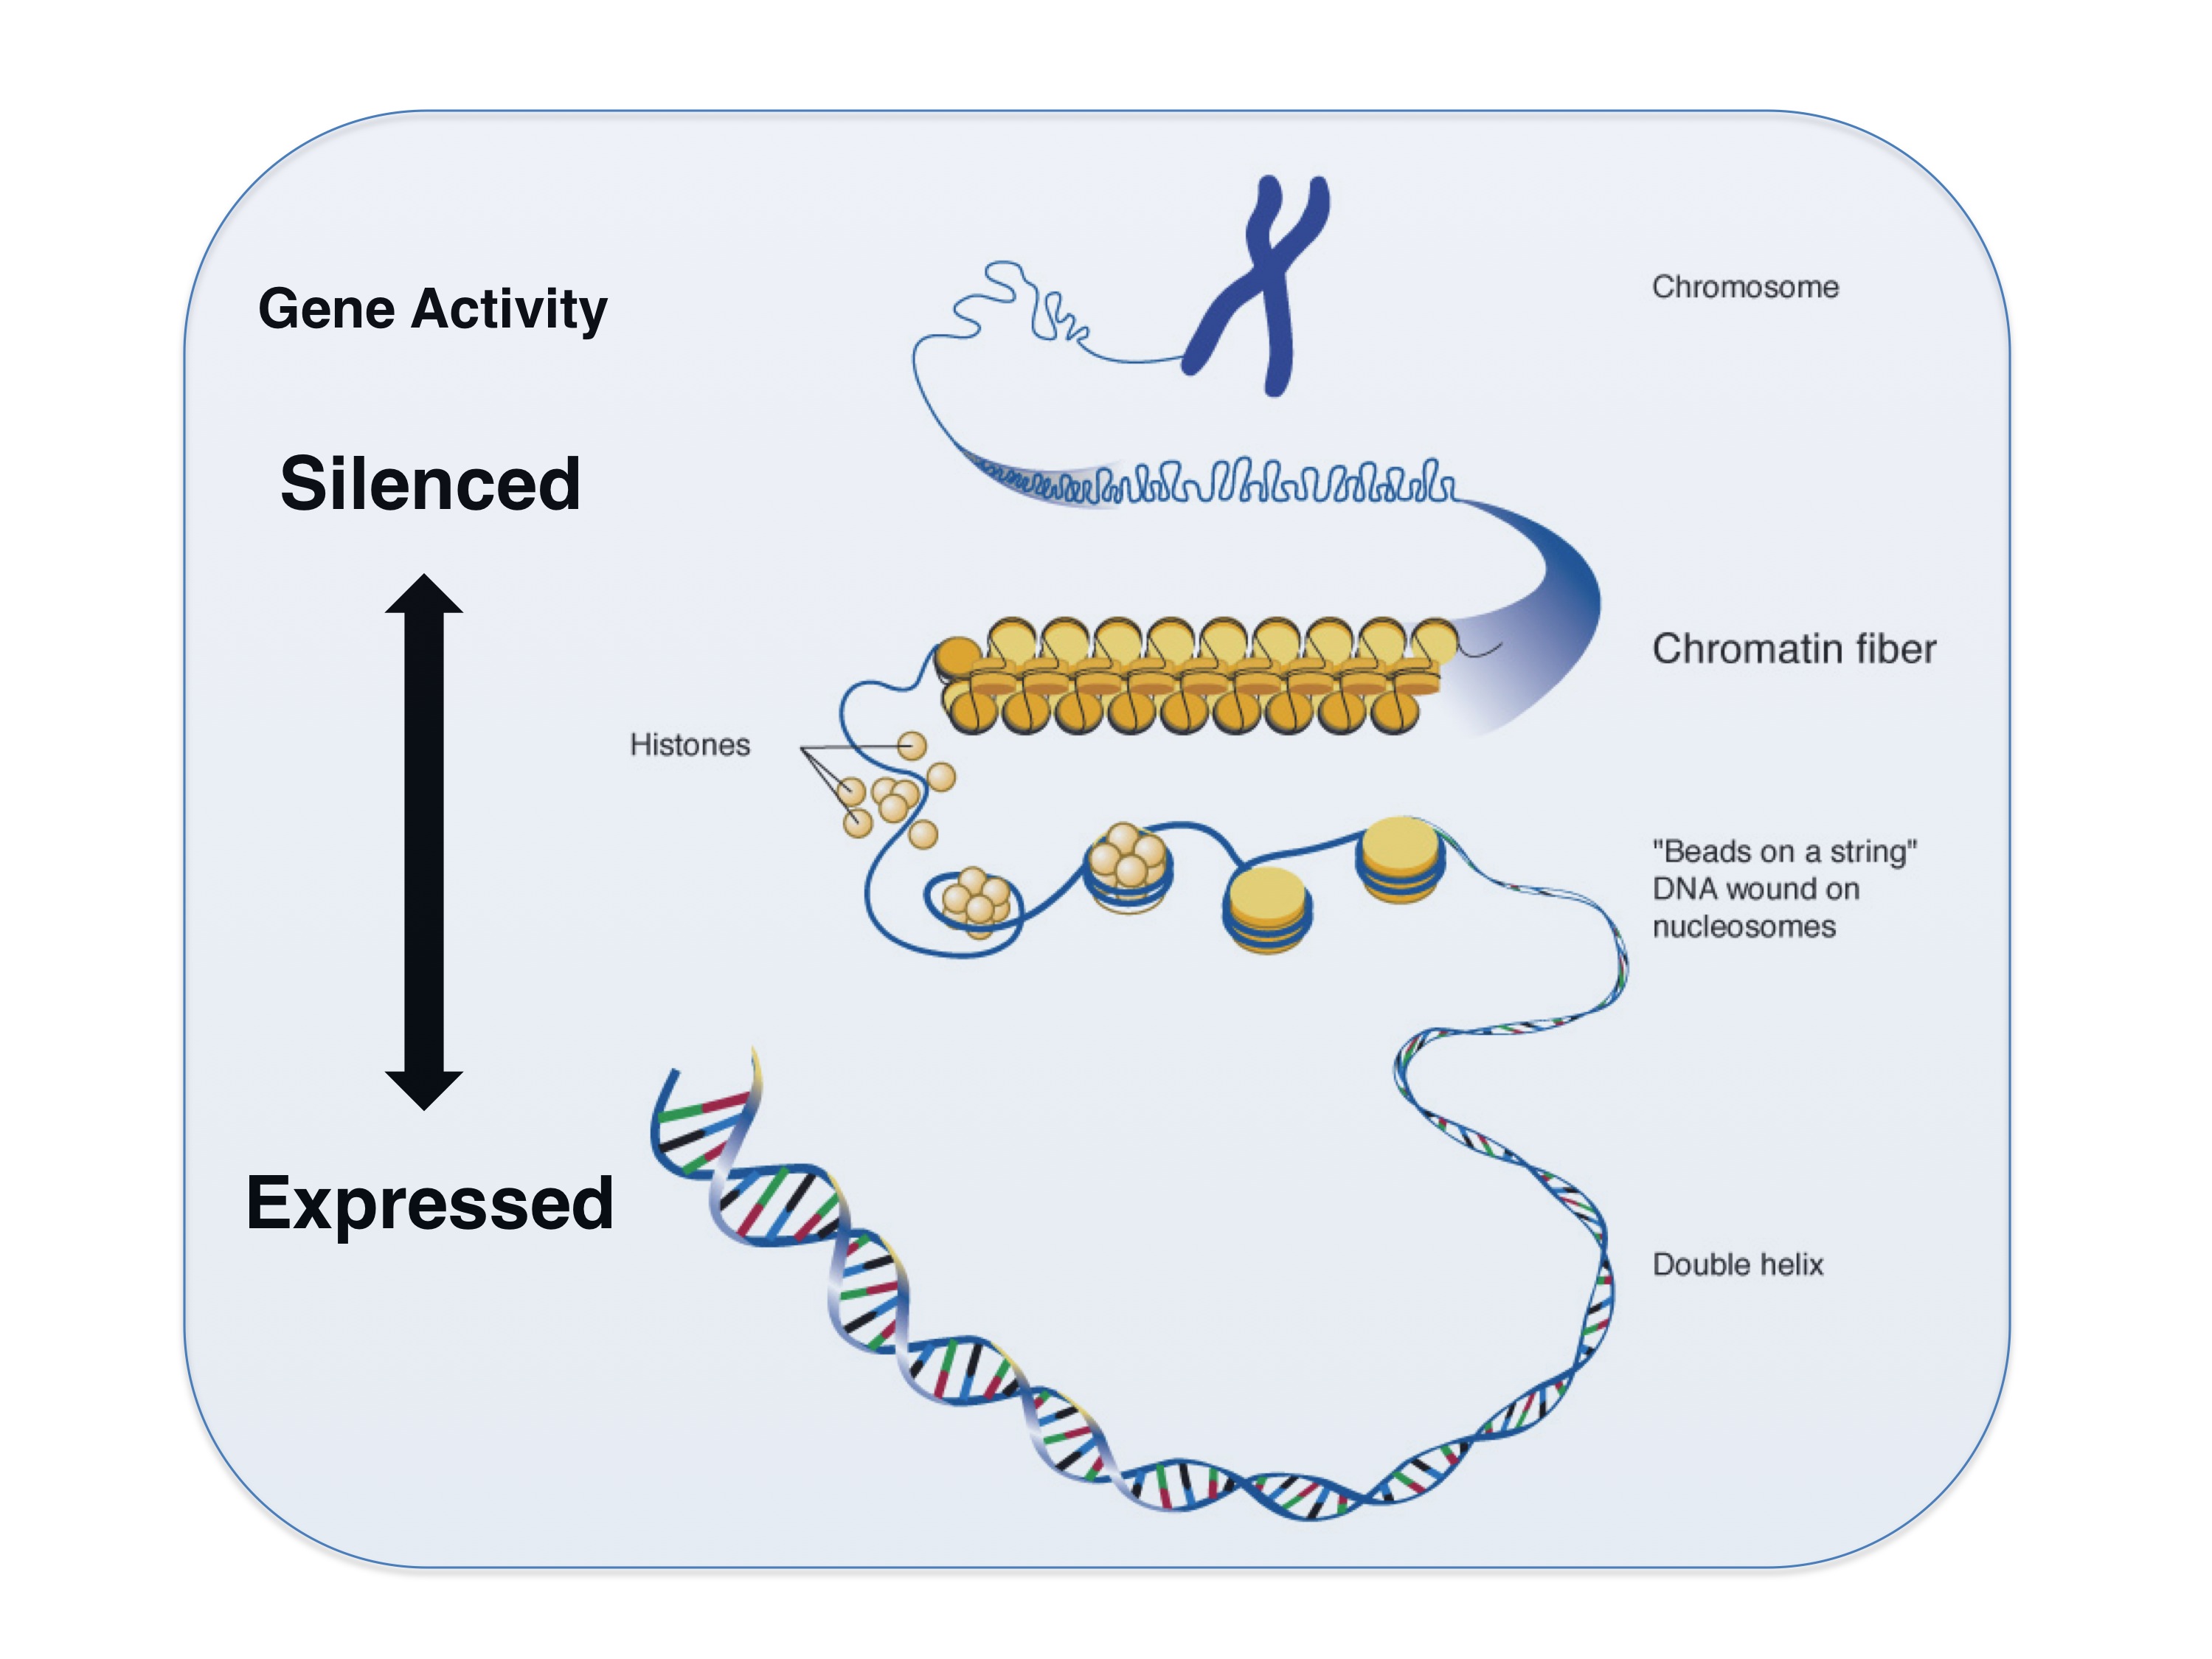 A model of the components of DNA depicting locations where gene activity may be silenced or expressed, including histones